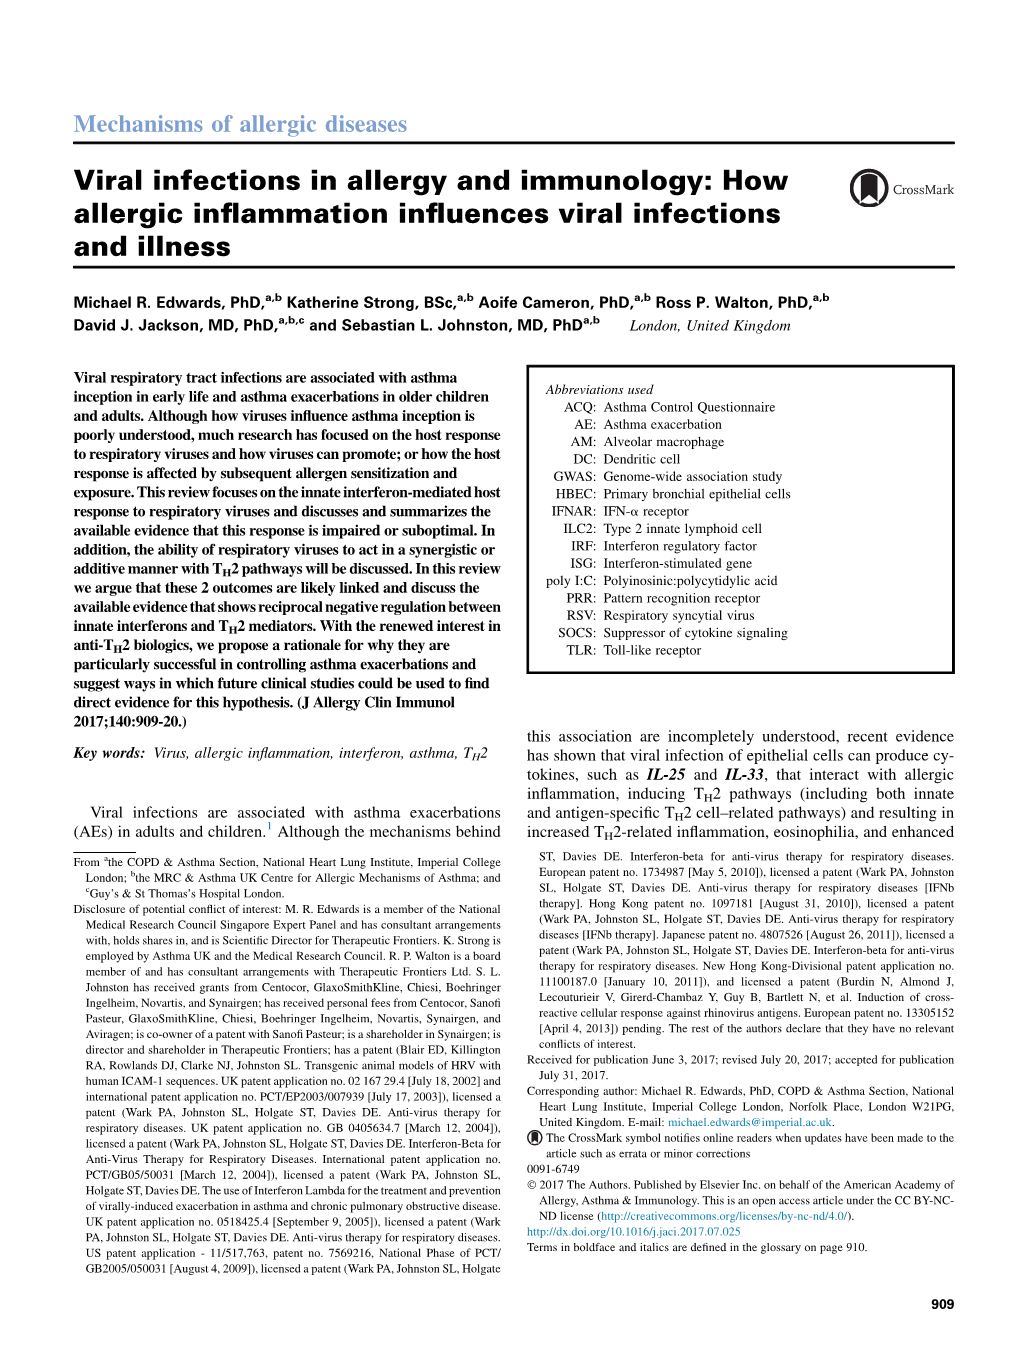 How Allergic Inflammation Influences Viral Infections and Illness